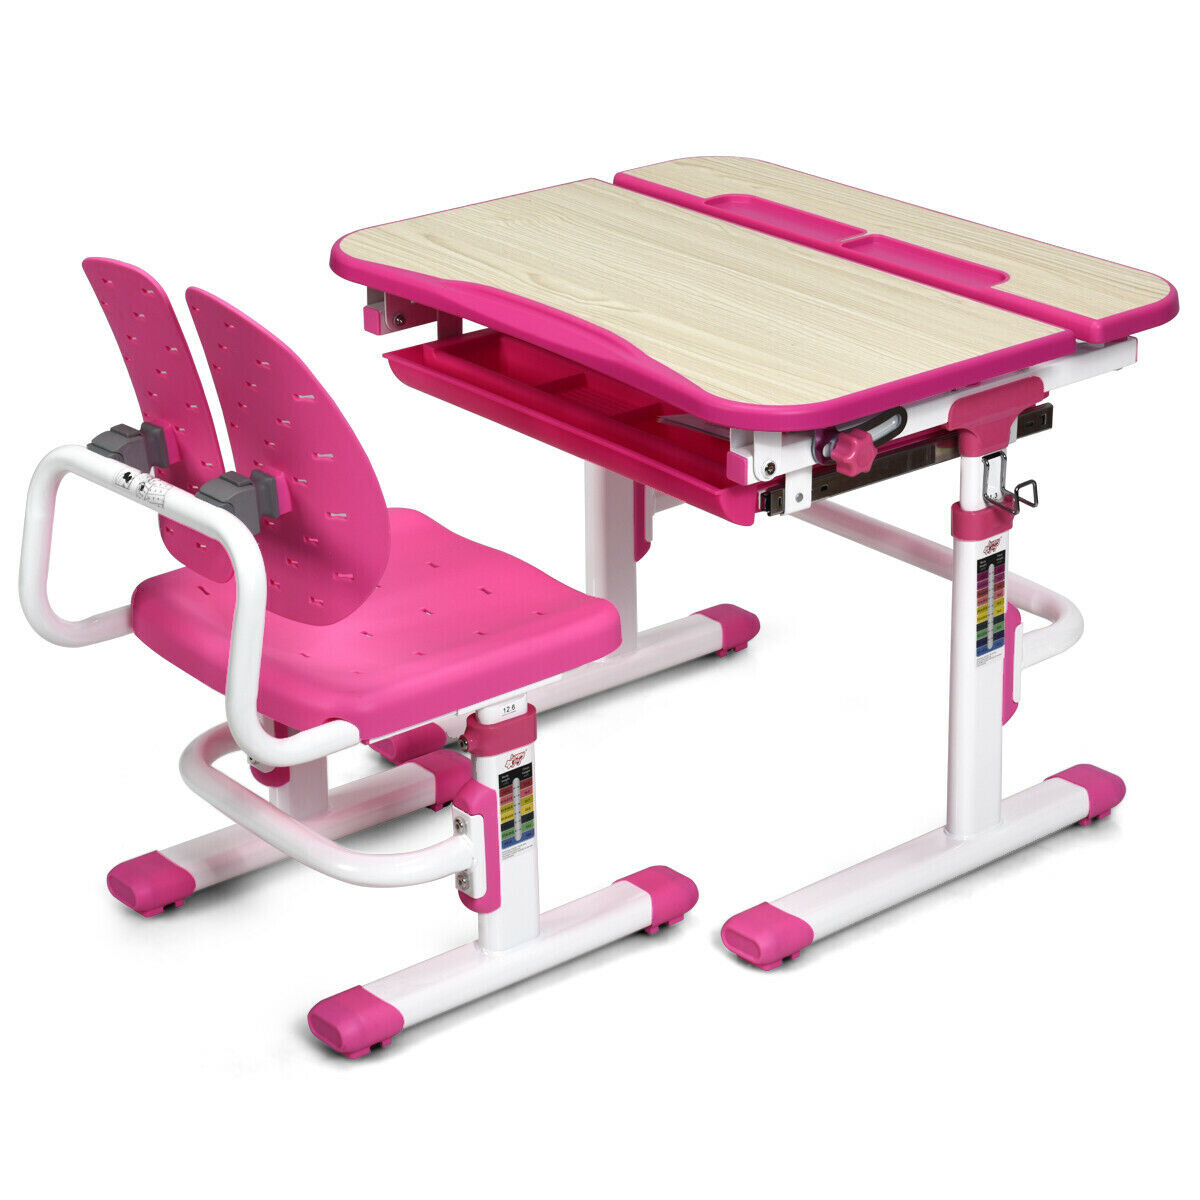 Height Adjustable Kids Study Desk and Chair Set-Pink - Color: Pink